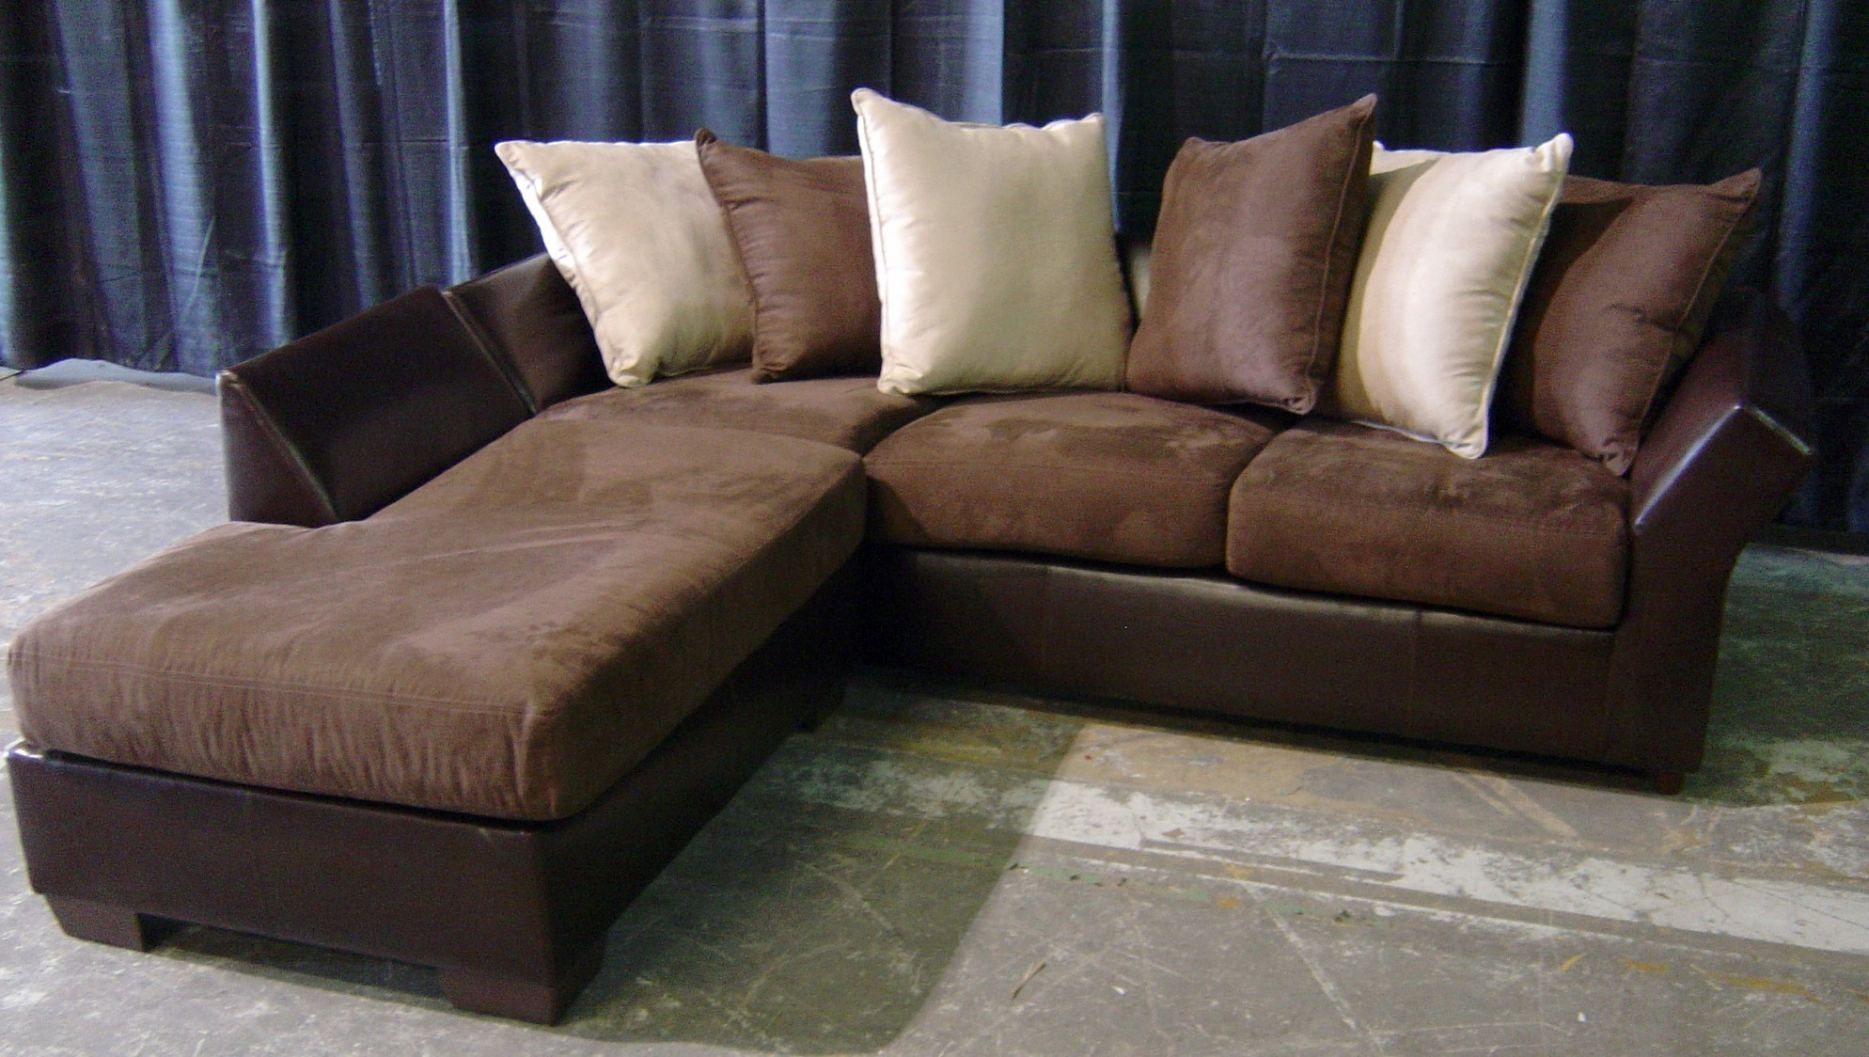 Faux Suede Couch | Tirtagucipool Throughout Faux Suede Sofas (Photo 8 of 10)